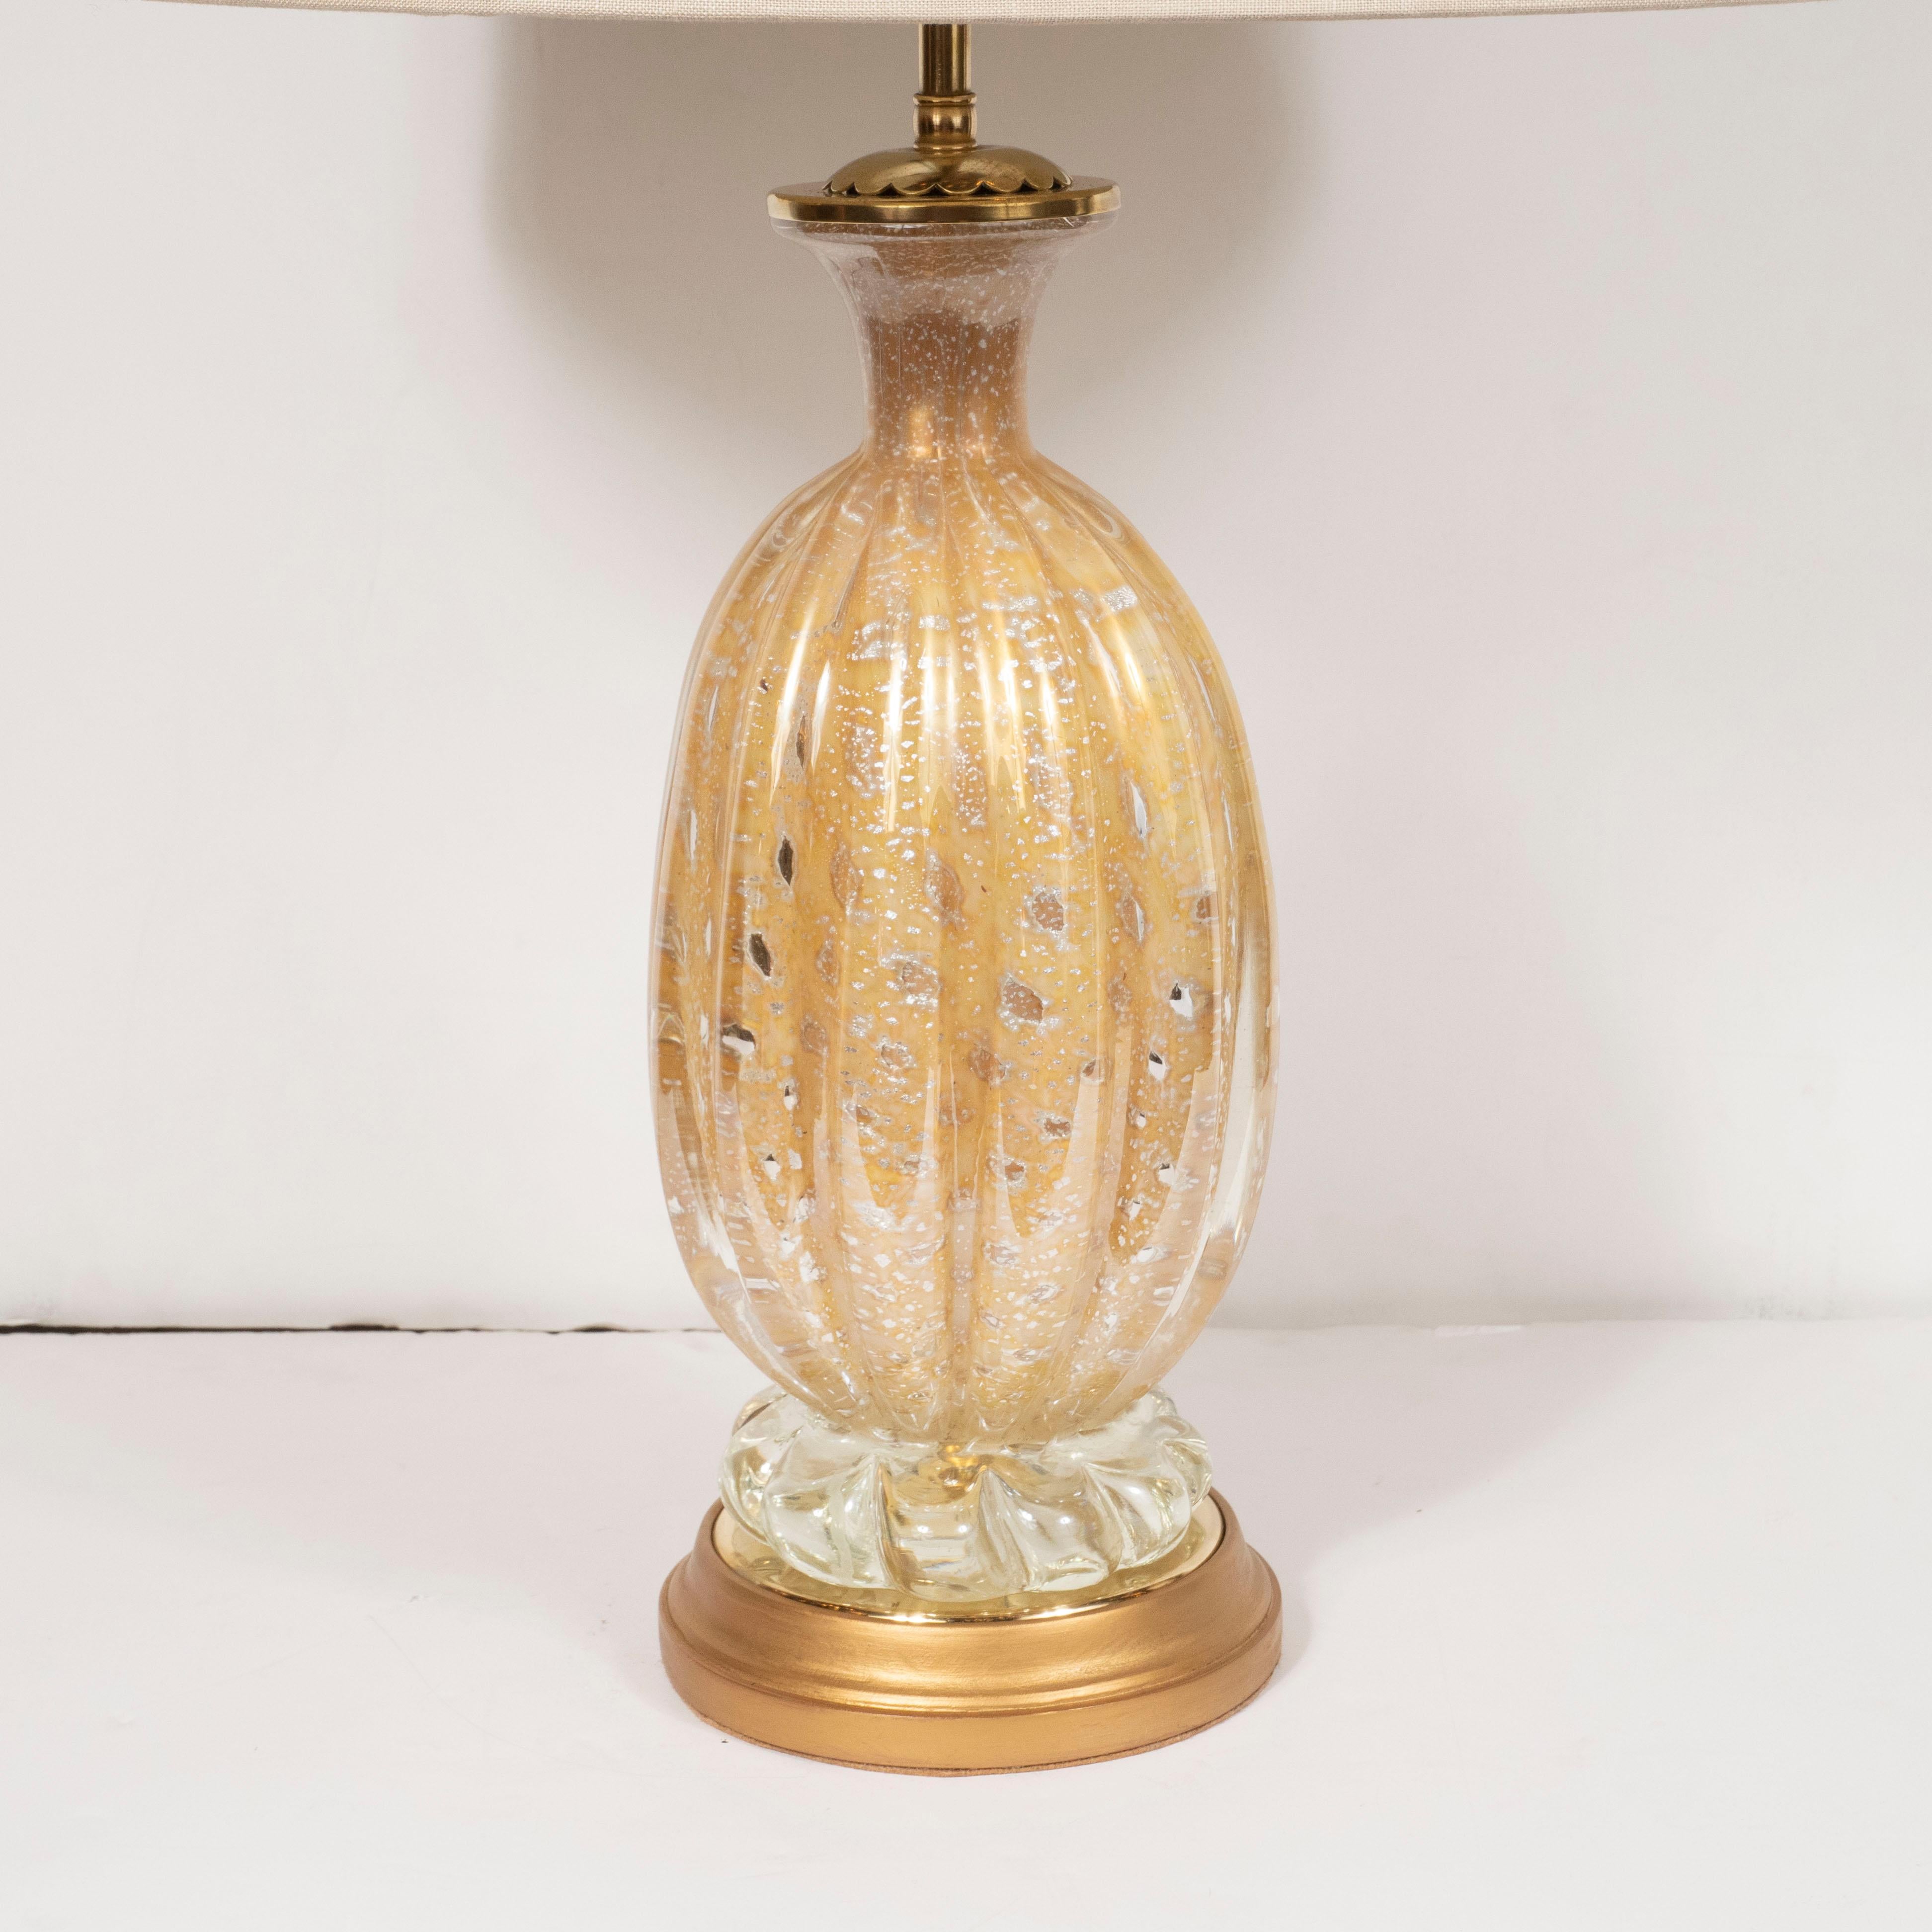 Pair of Mid-Century Modern Channeled 24-Karat Gold Table Lamps, Barovier e Toso 1